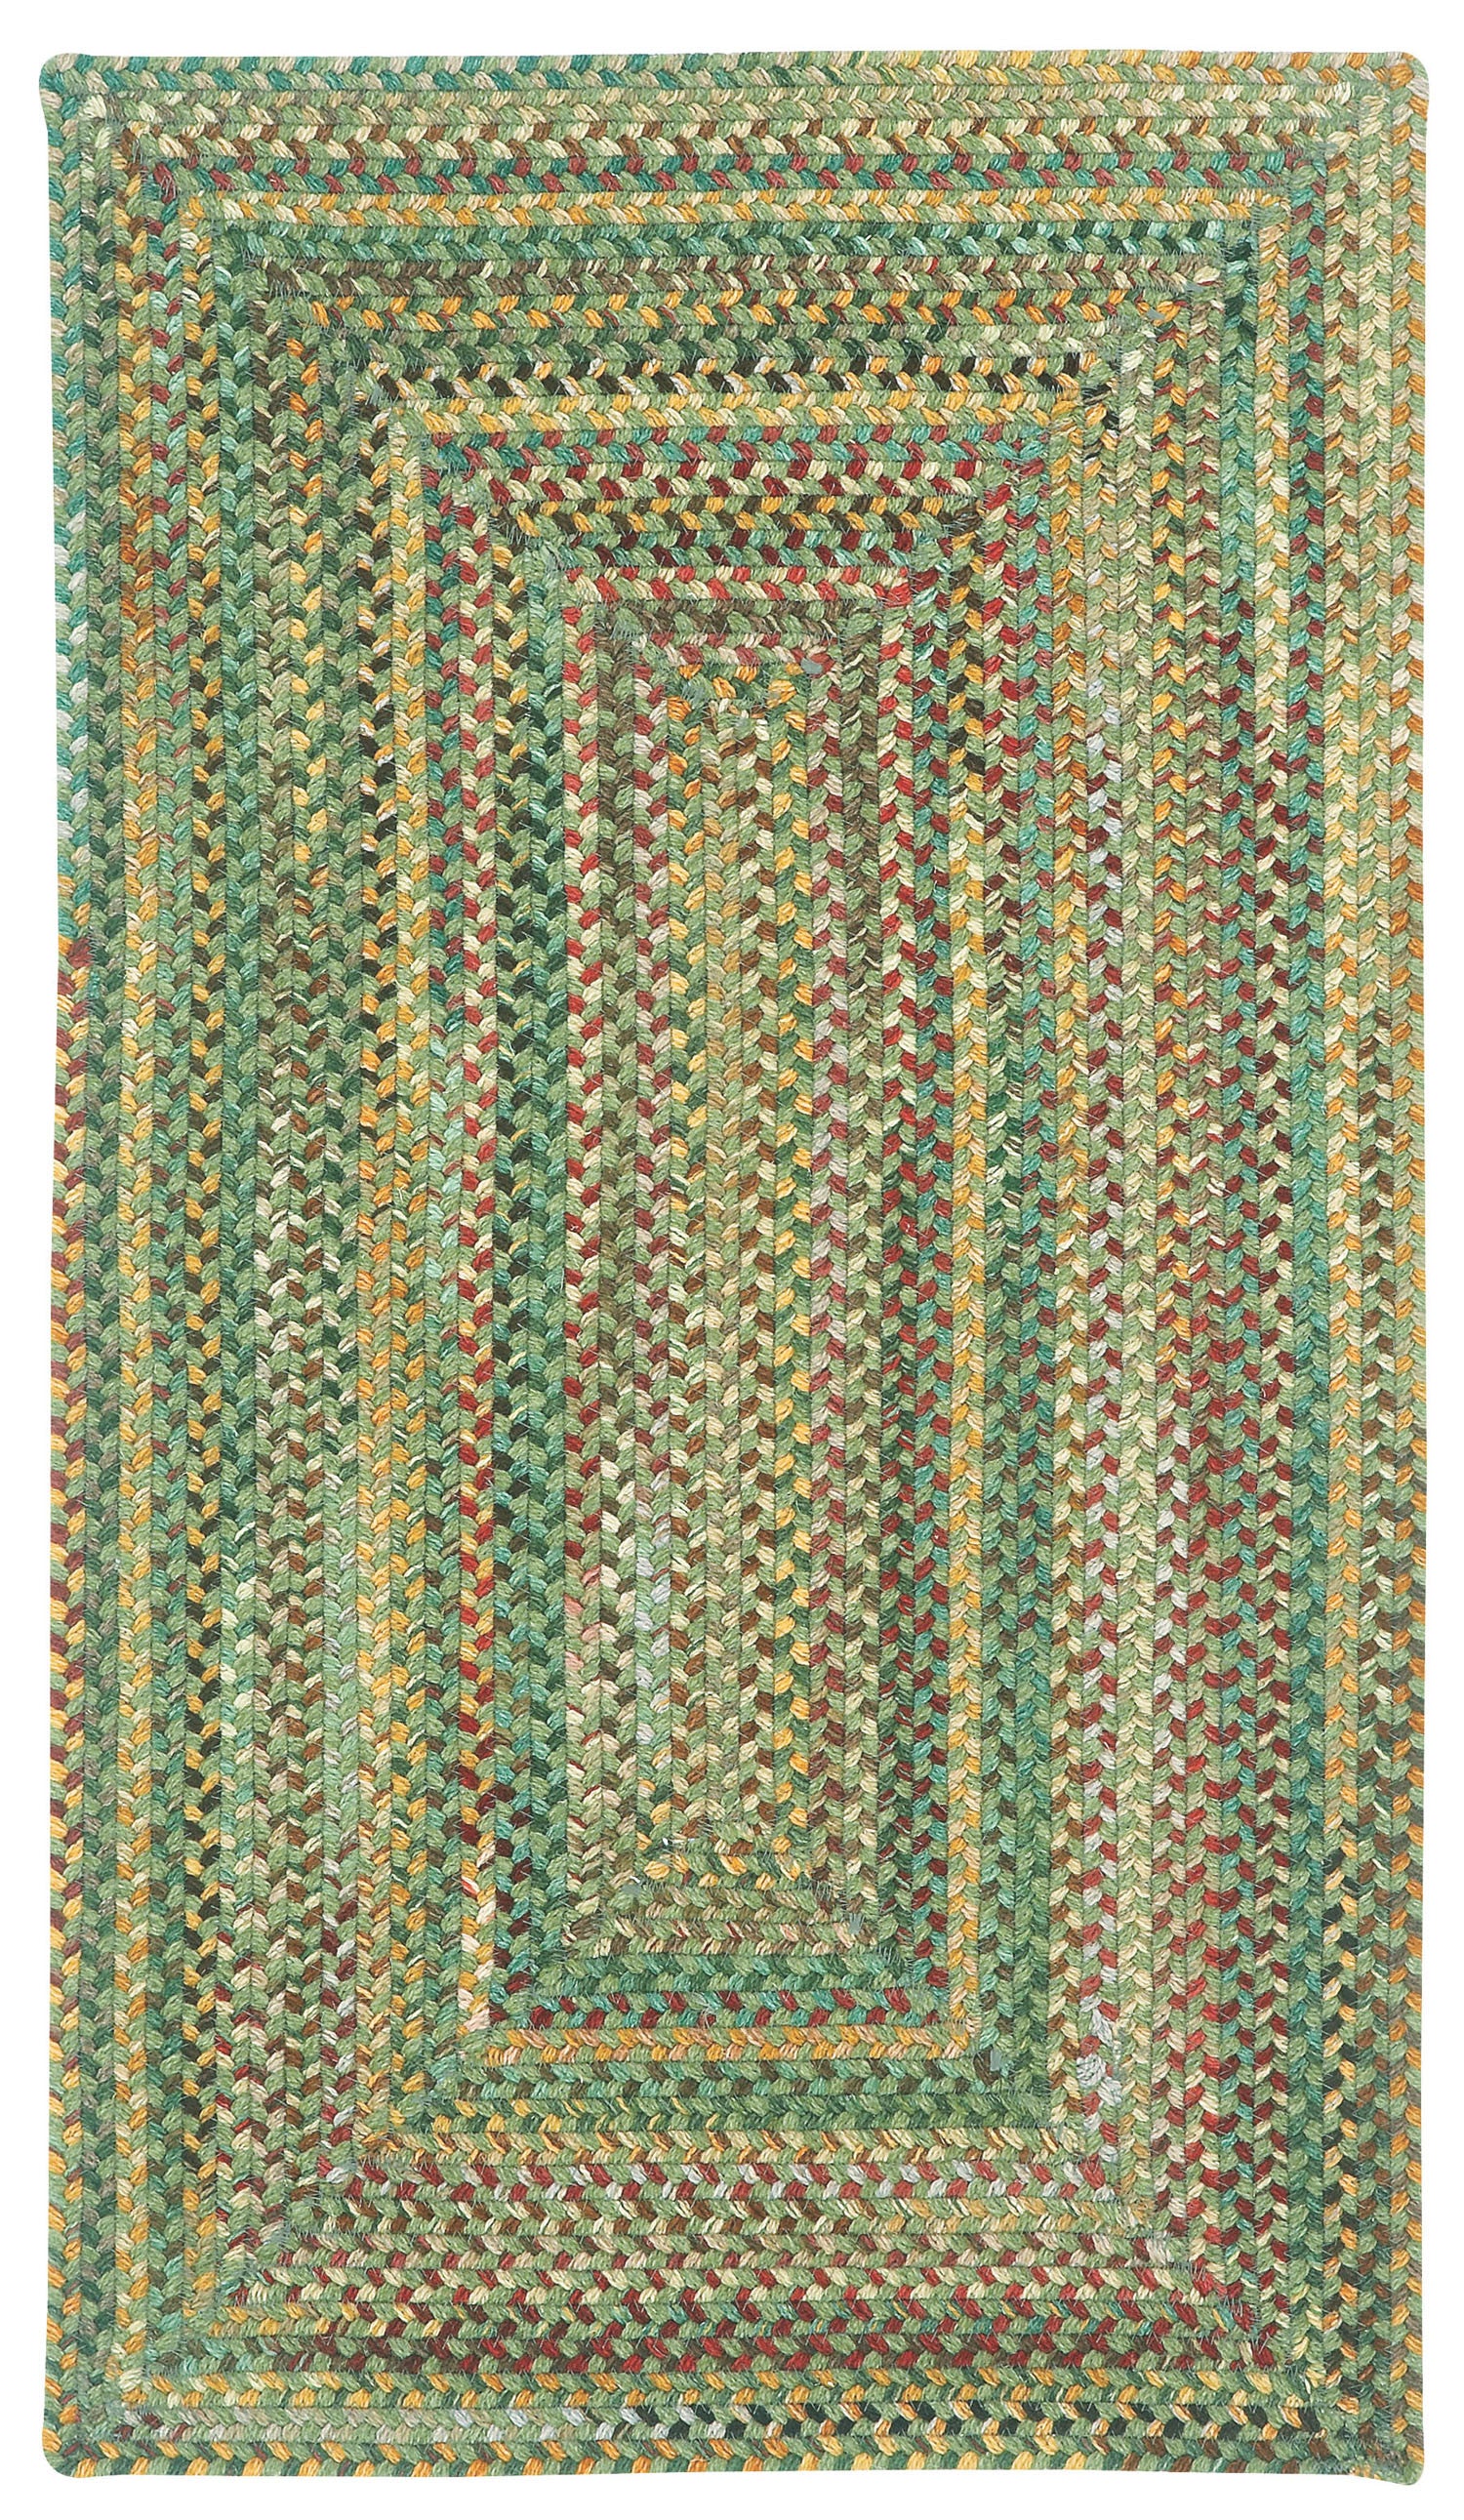 Buy the Perfect Braided Rugs